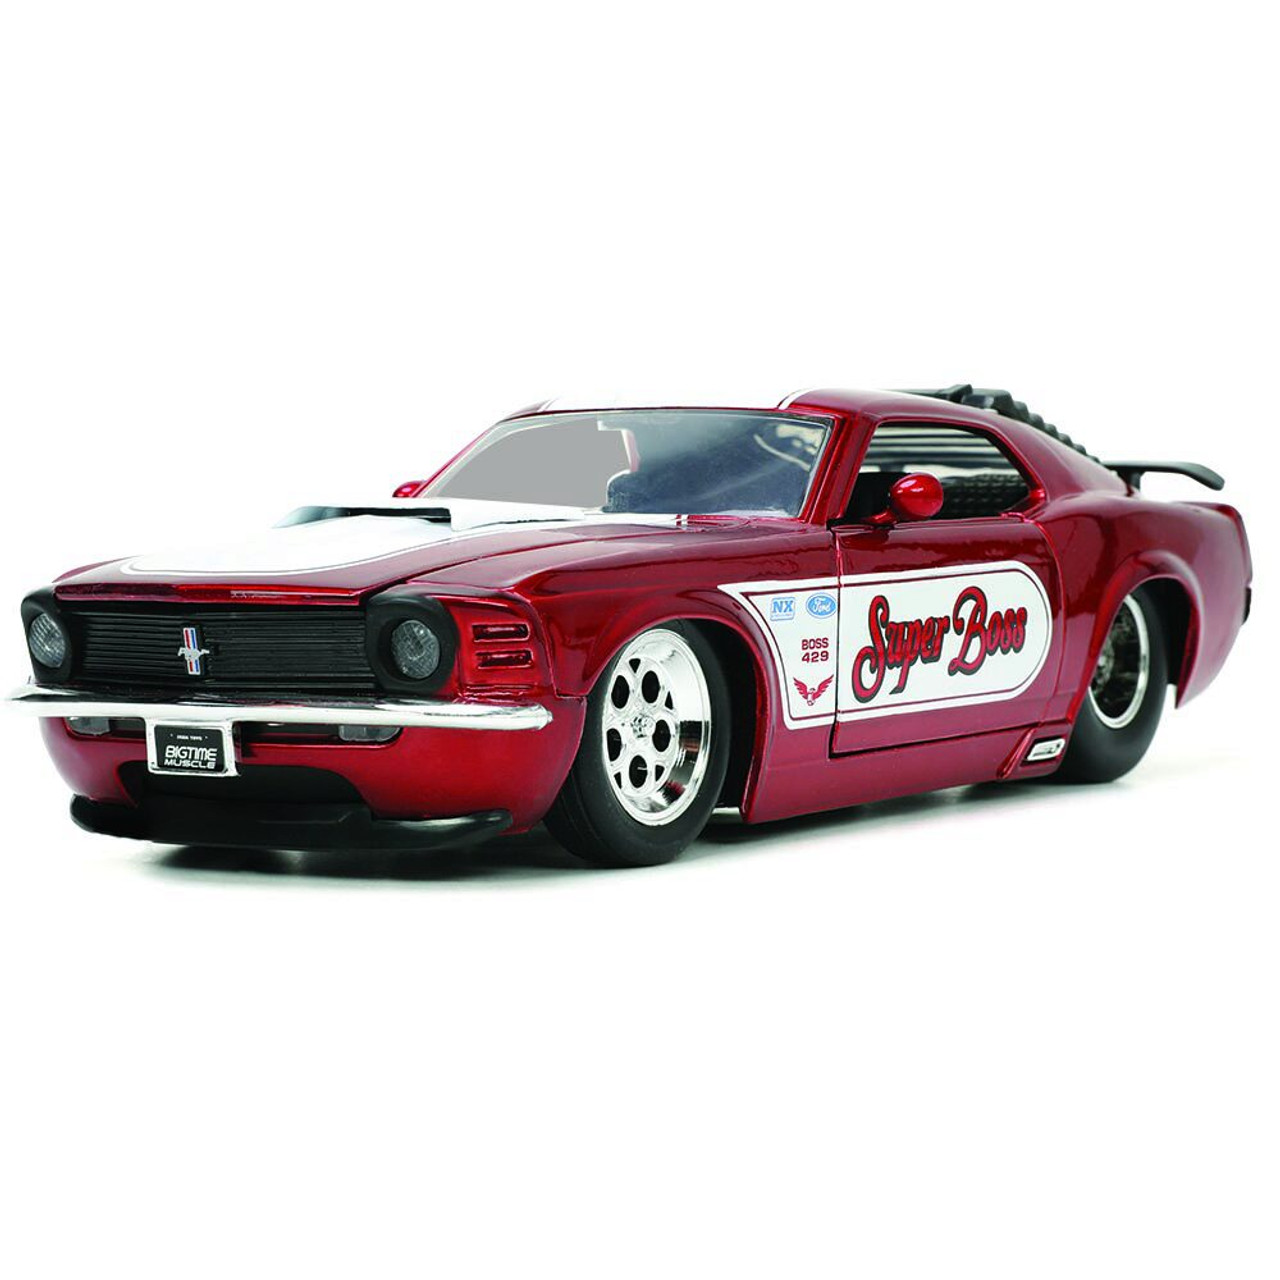 1970 Ford Mustang Boss - BTM 1:24 Scale Diecast Model Car by Jada Toys